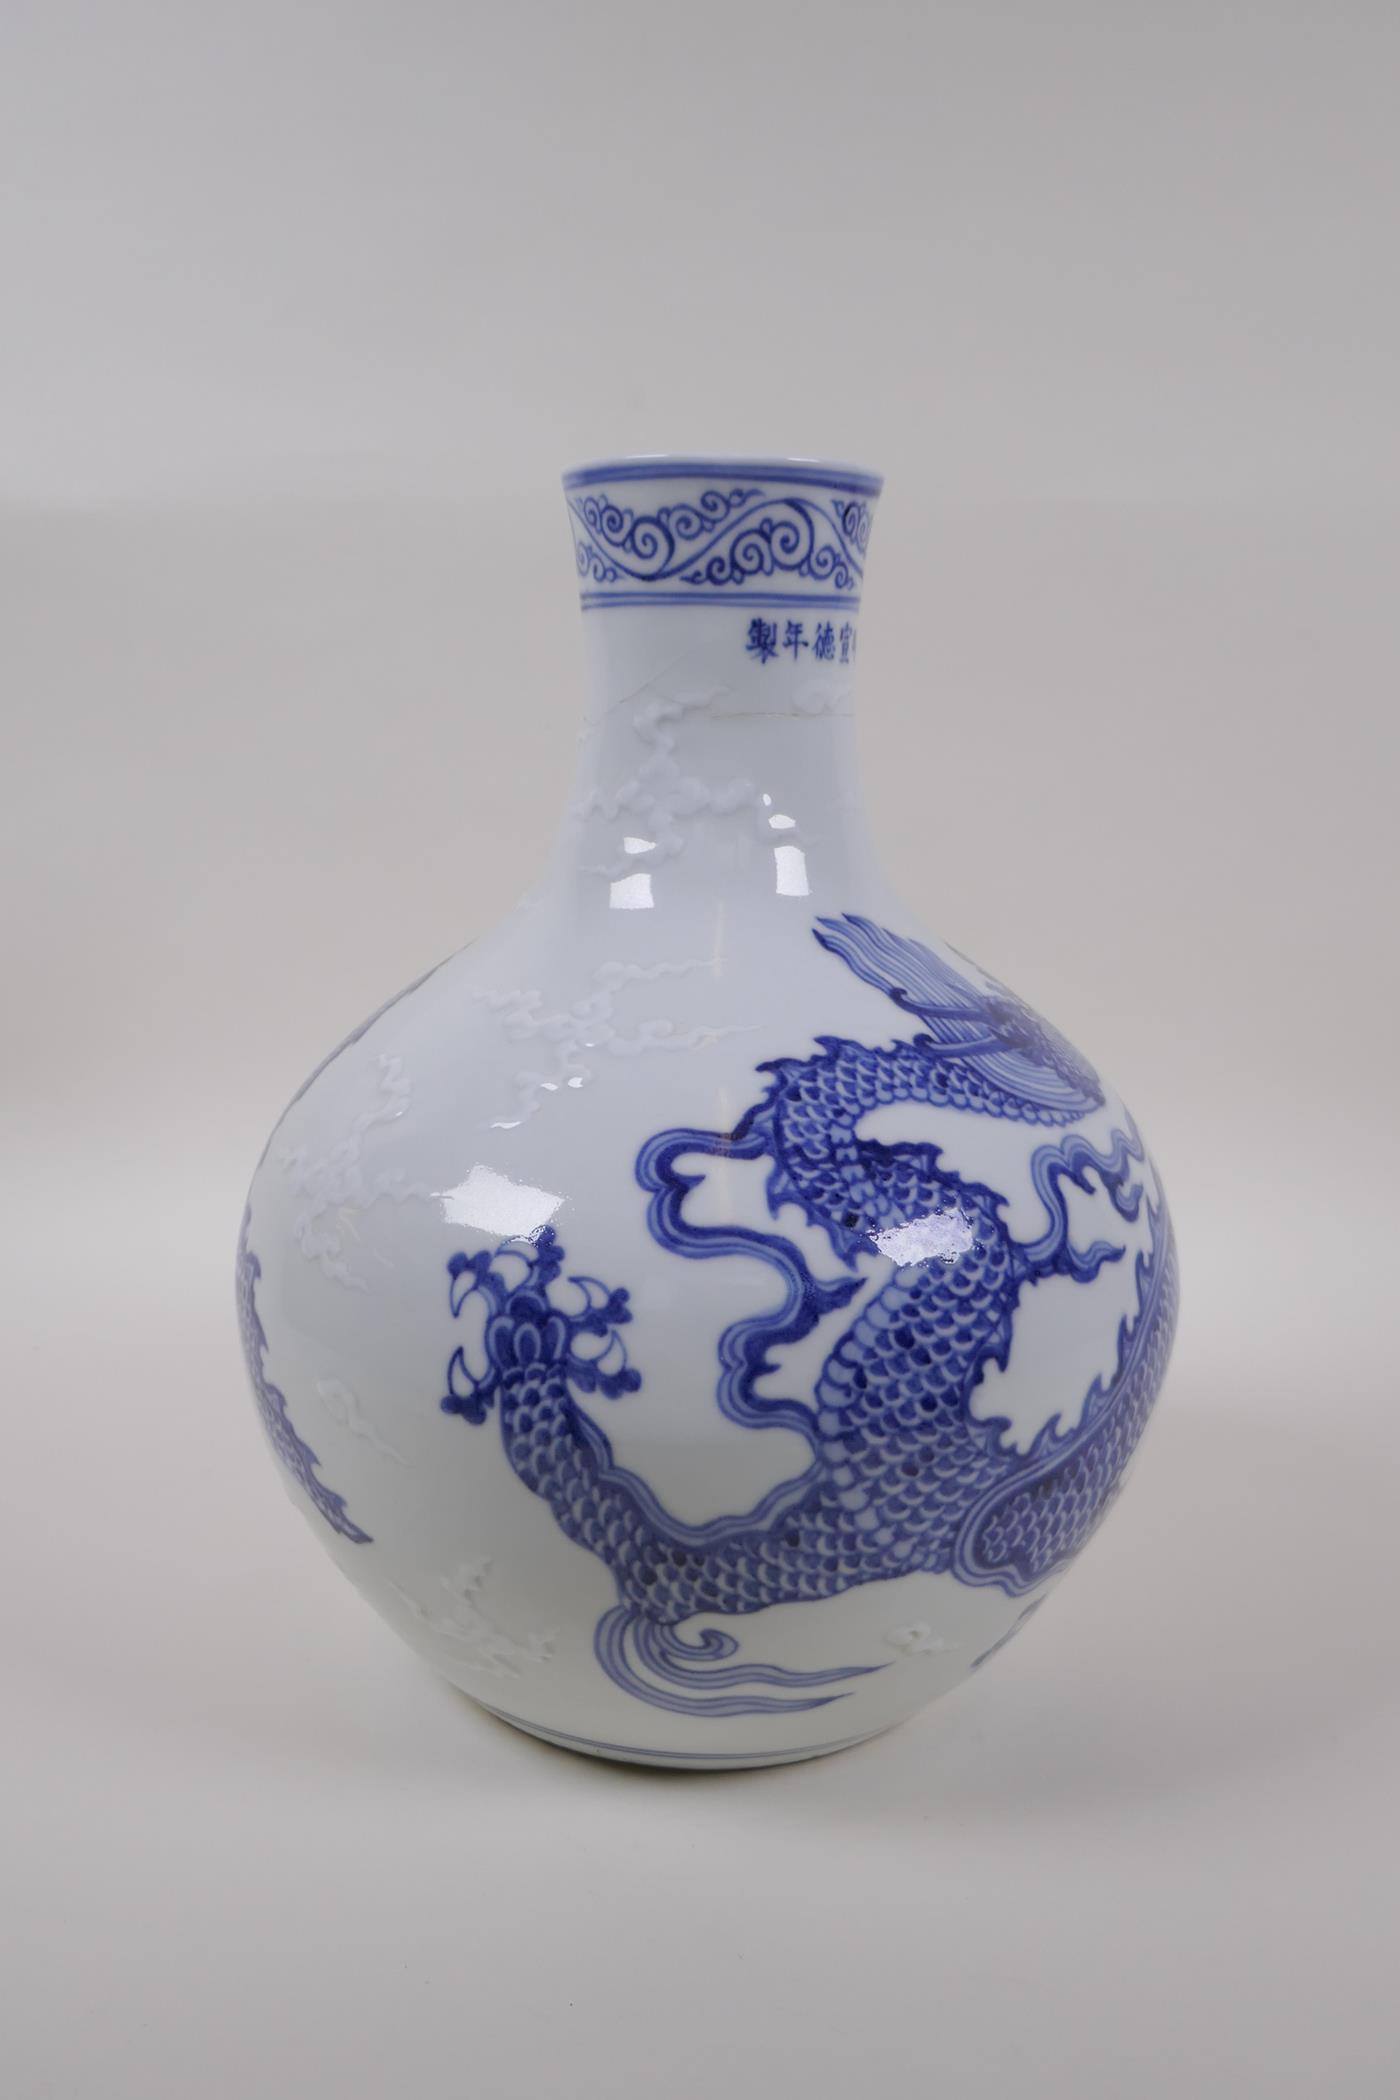 A blue and white porcelain vase decorated with a dragon in flight, Chinese Xuande 6 character mark - Image 5 of 9